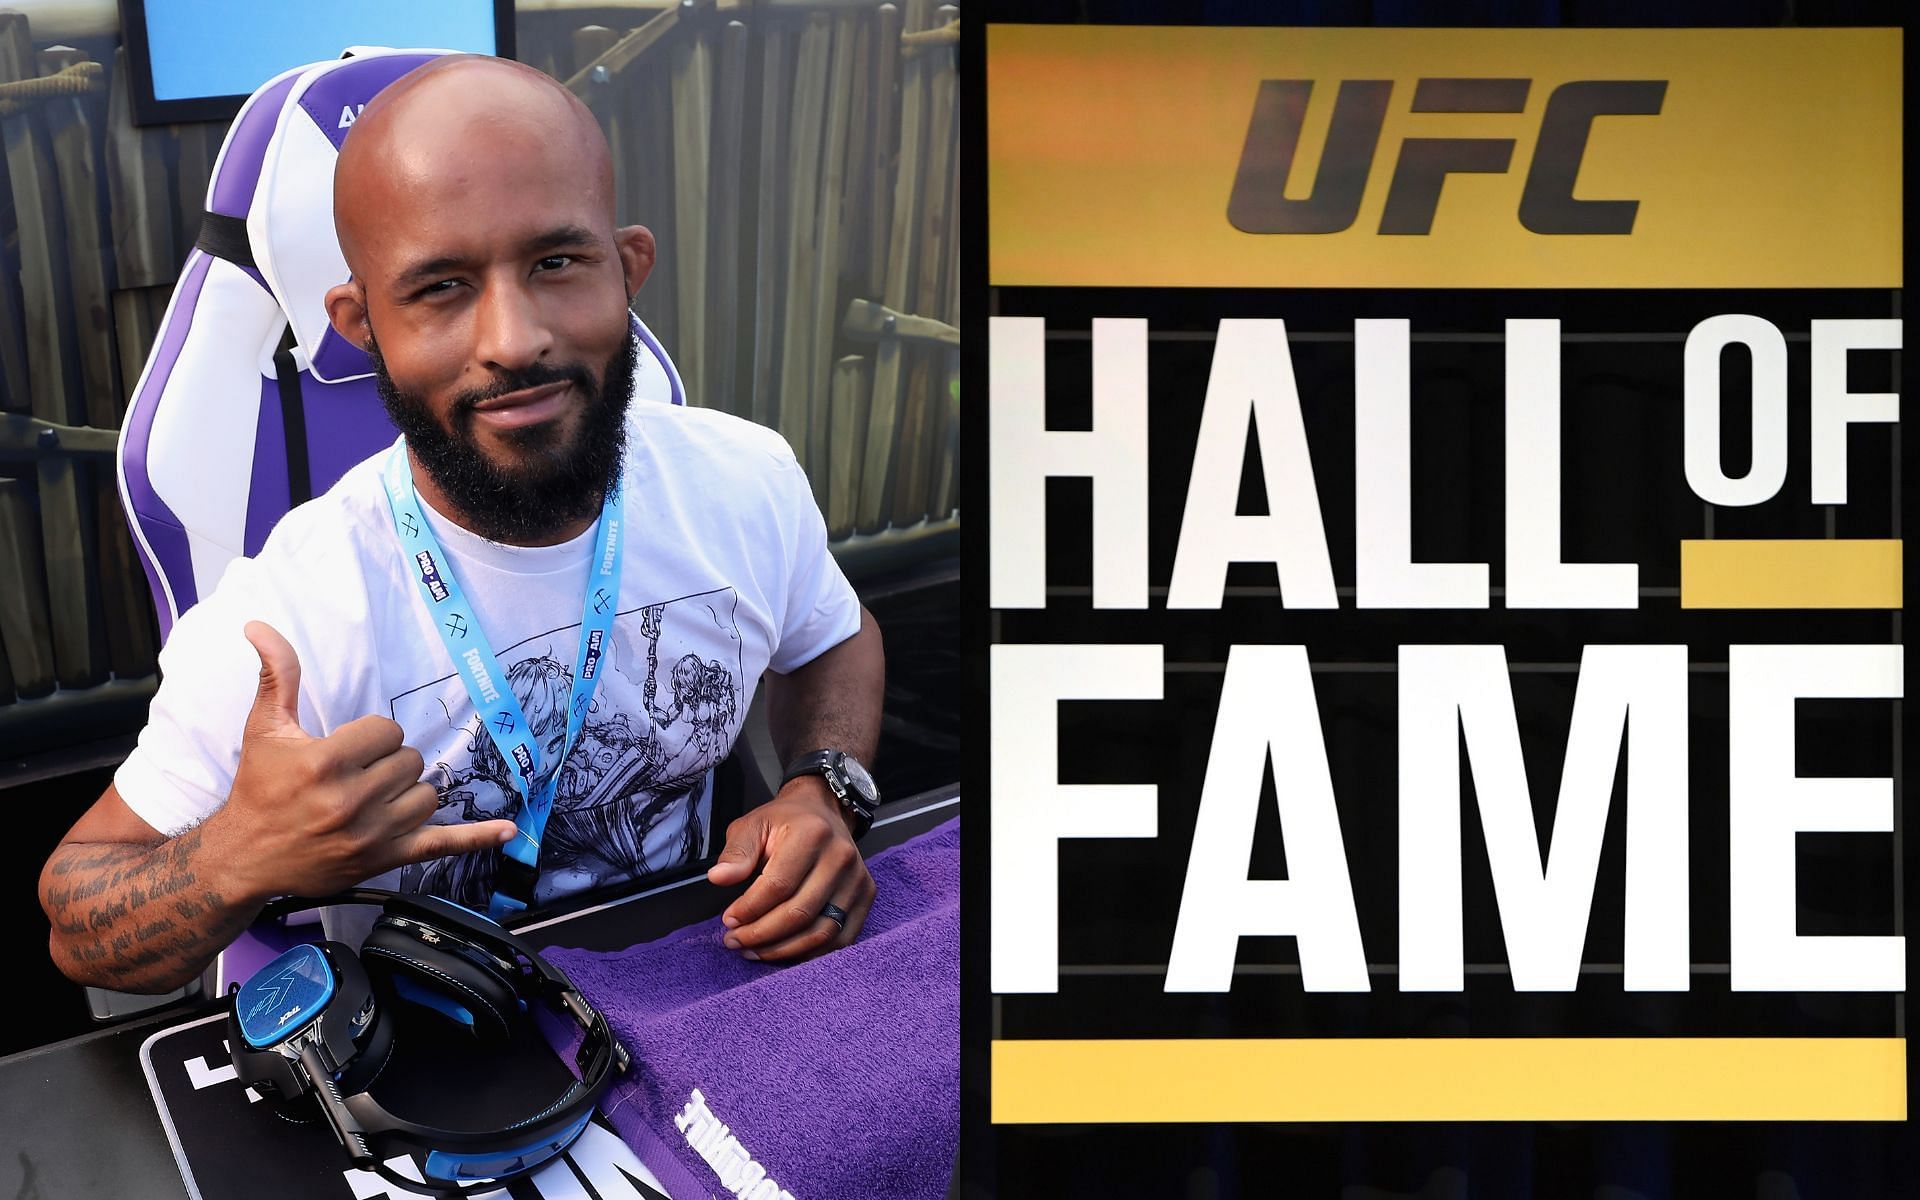 Demetrious Johnson discusses the UFC Hall of Fame